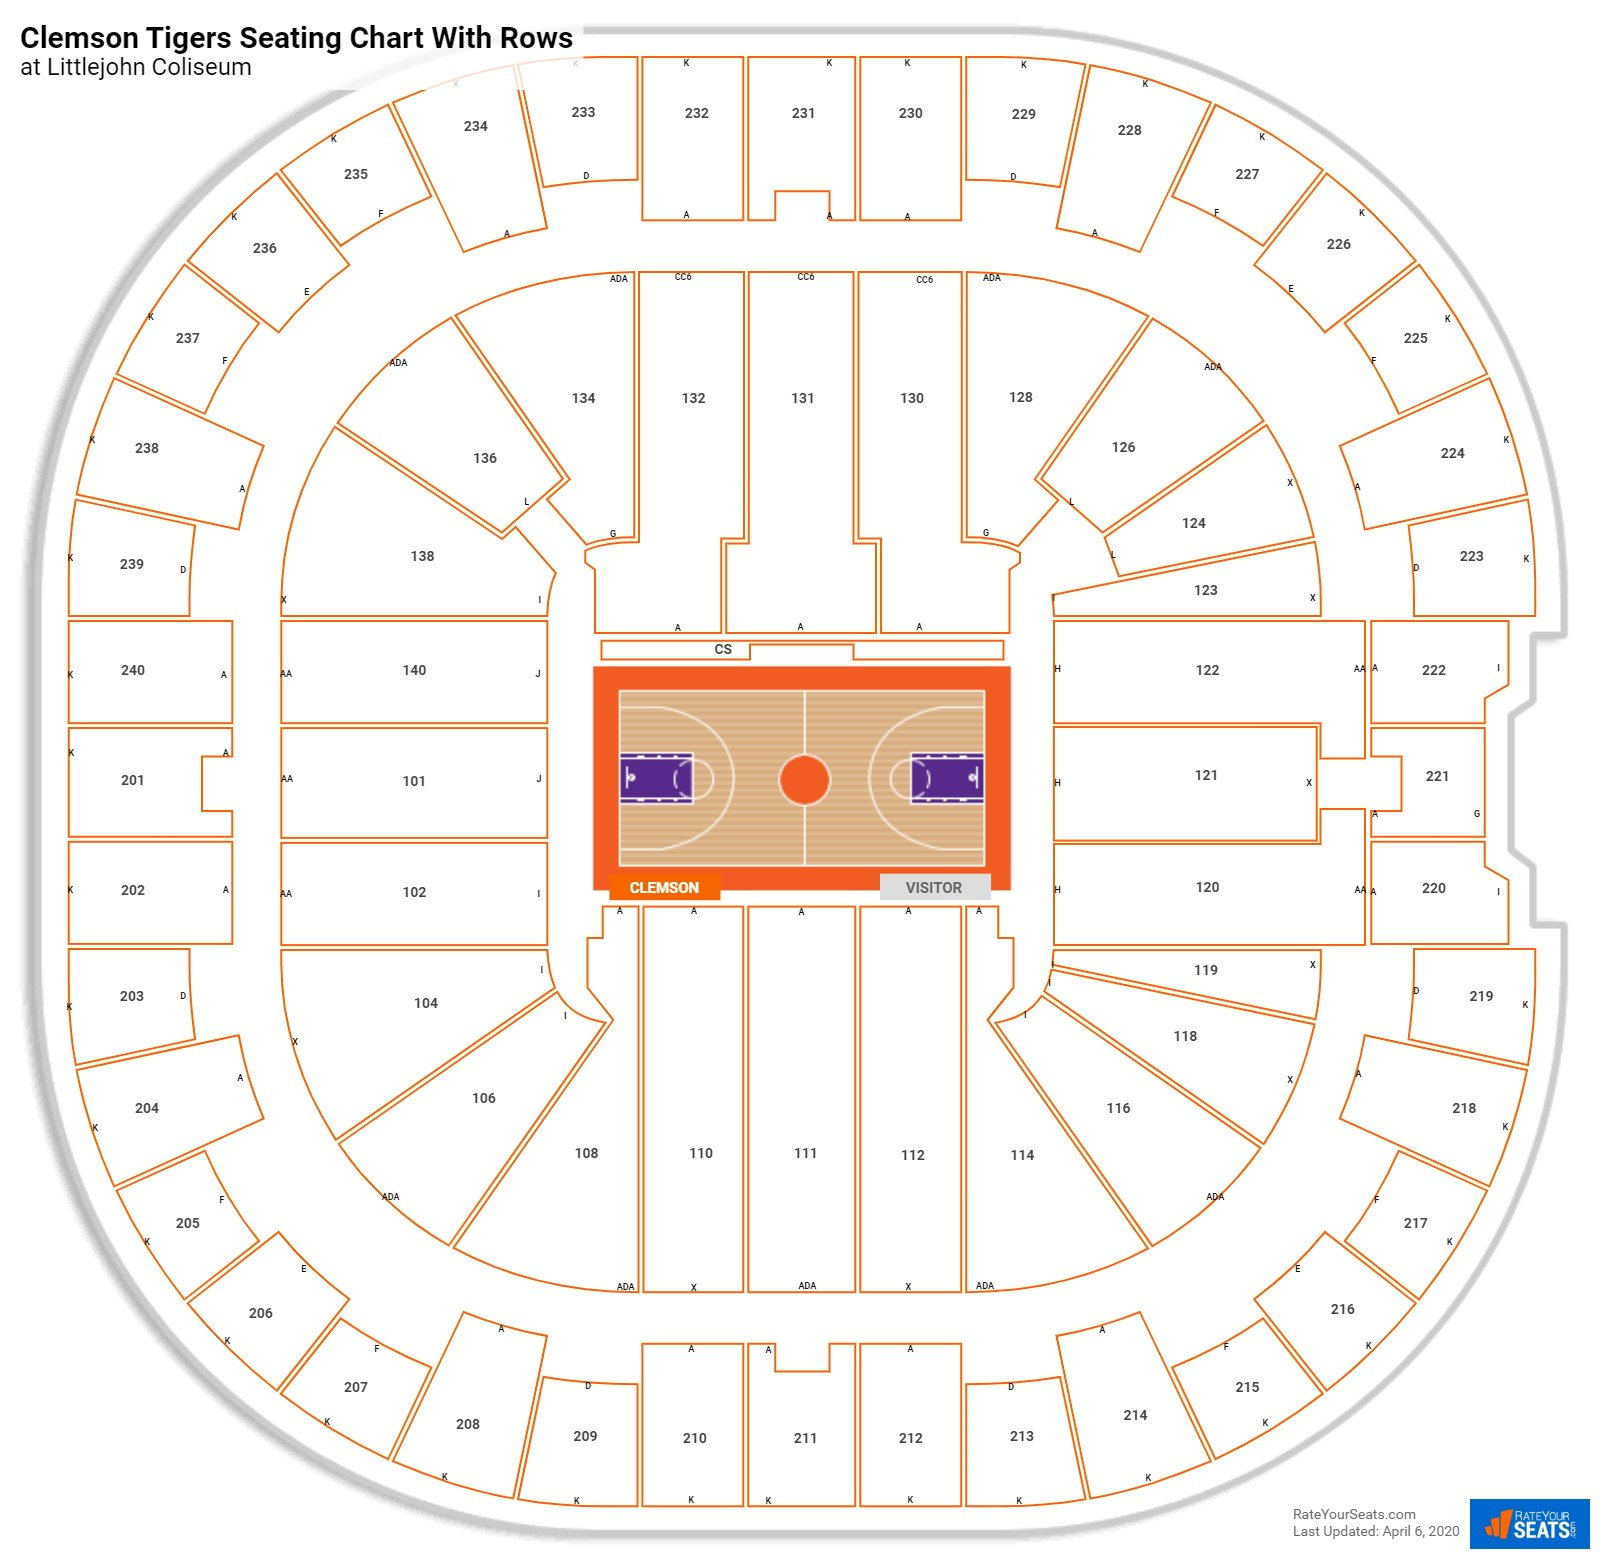 Littlejohn Coliseum seating chart with row numbers